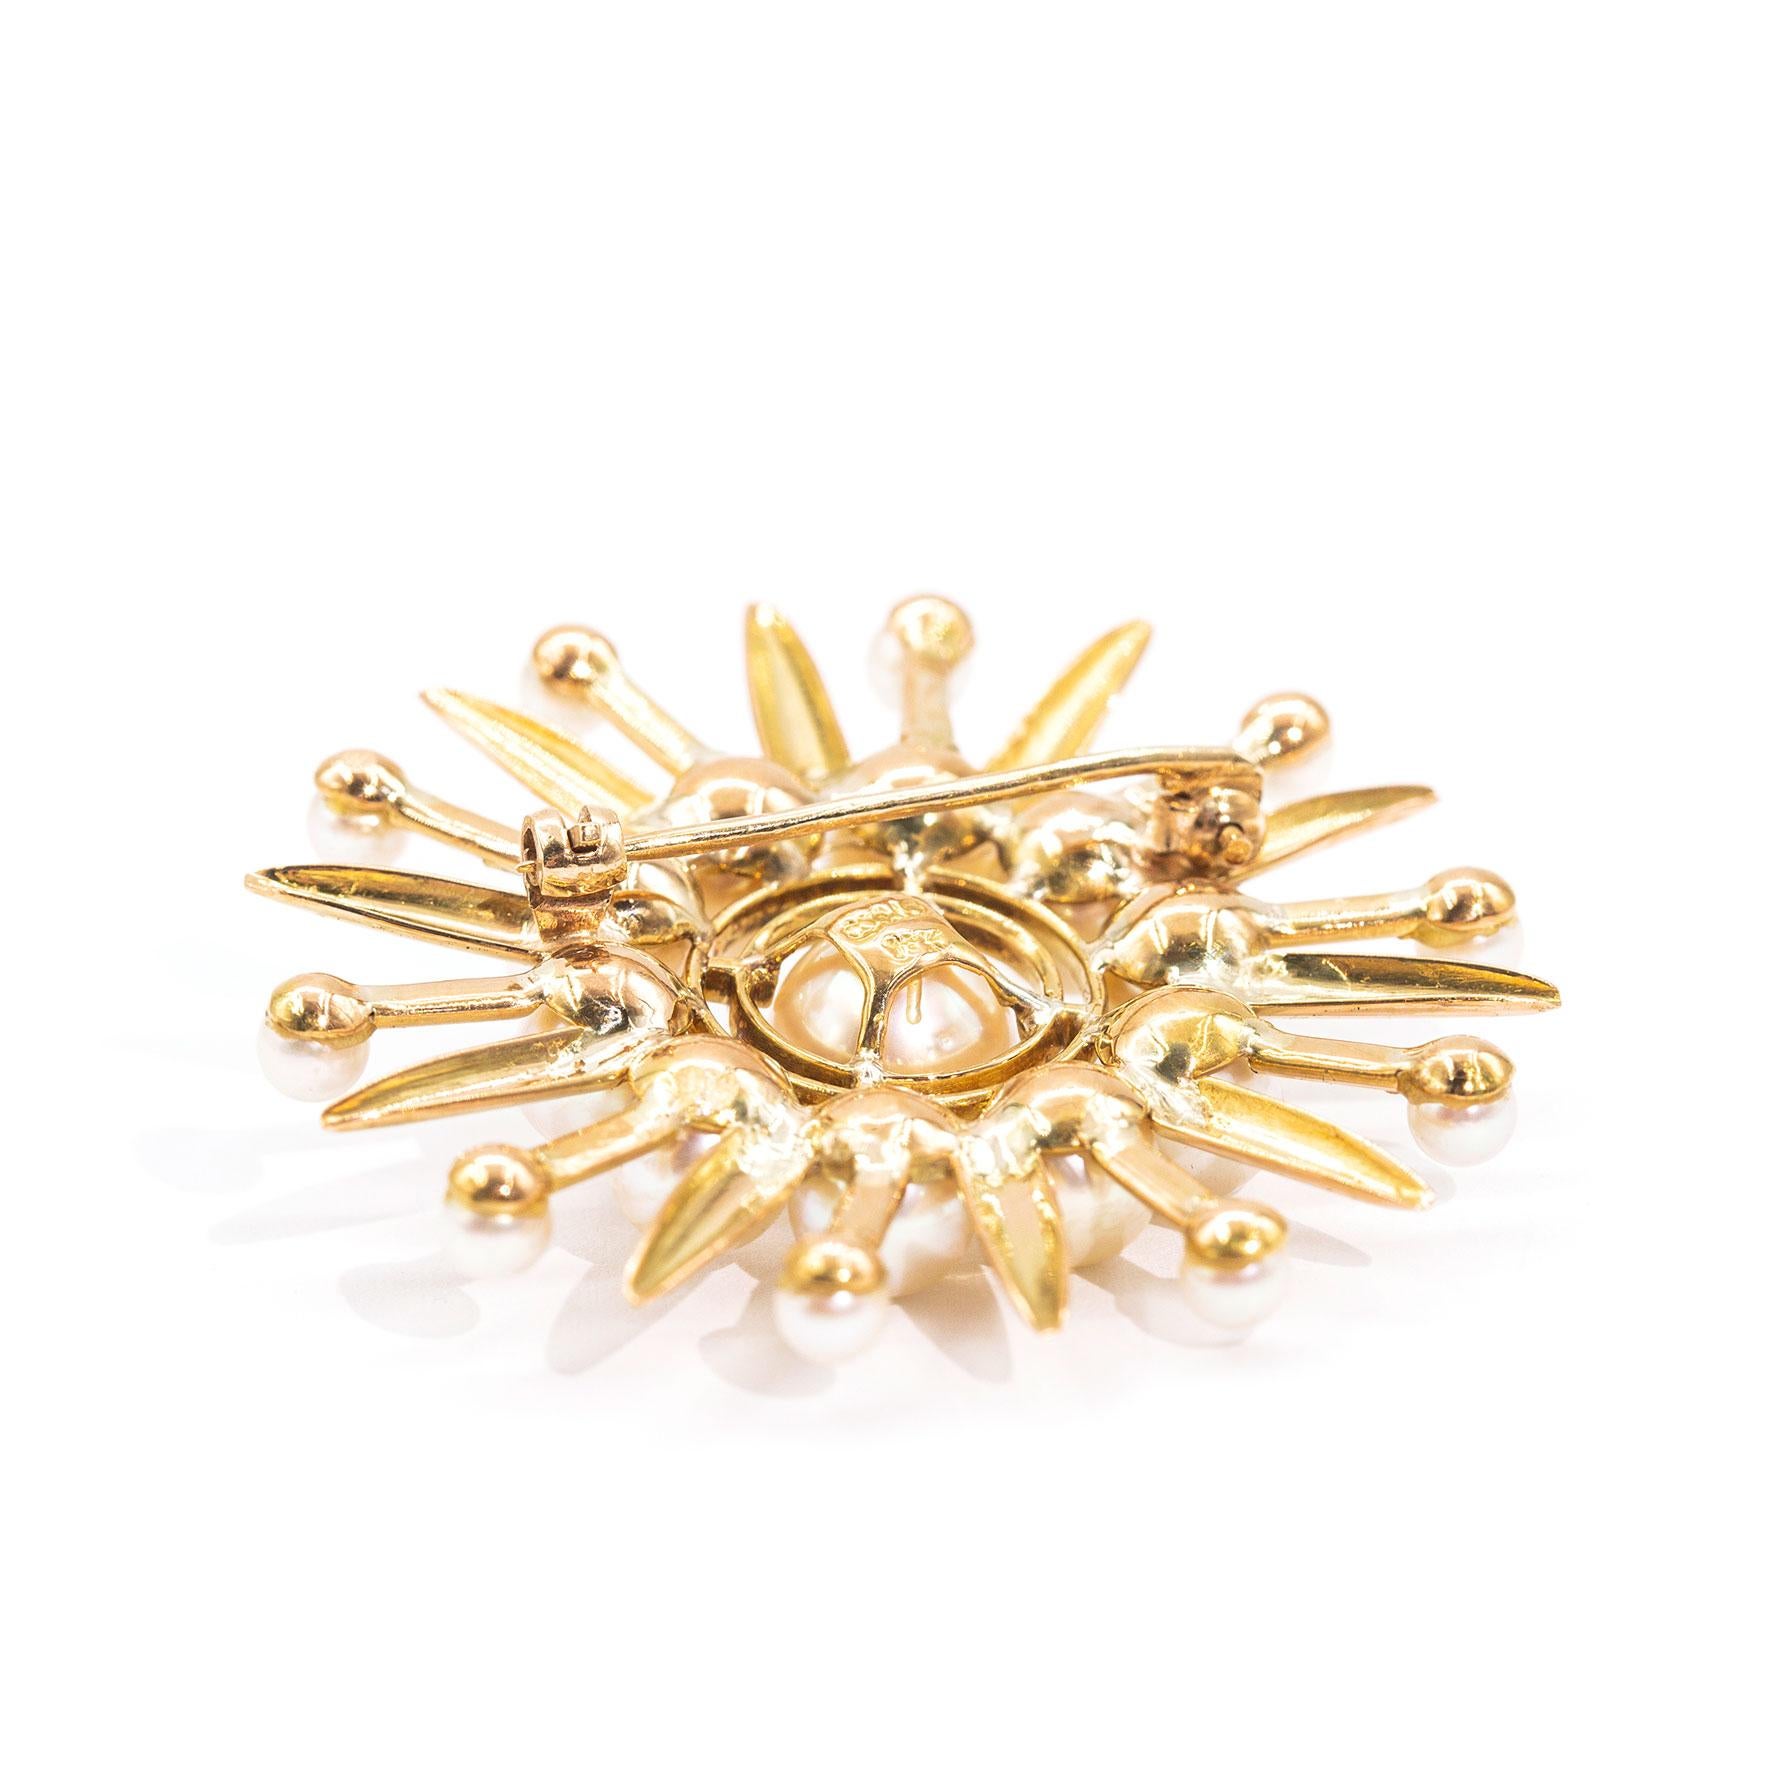 Round Cut 18 Carat Yellow Gold Cultured Pearl Vintage Brooch, circa 1900s